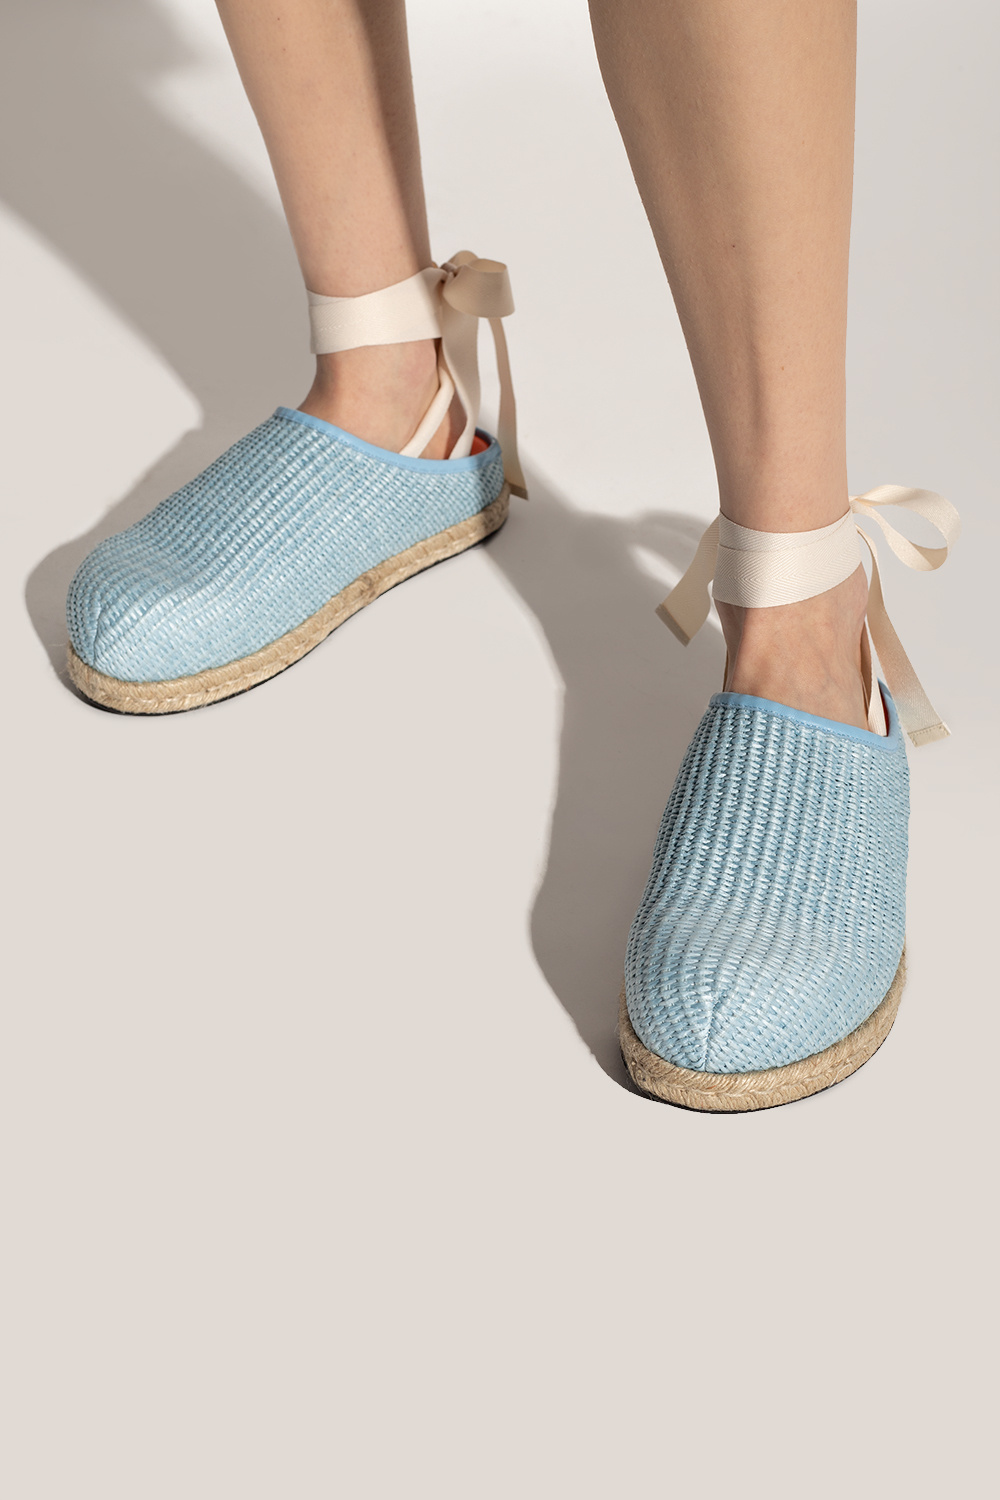 Marni ‘Fussbett’ slides with ankle tie